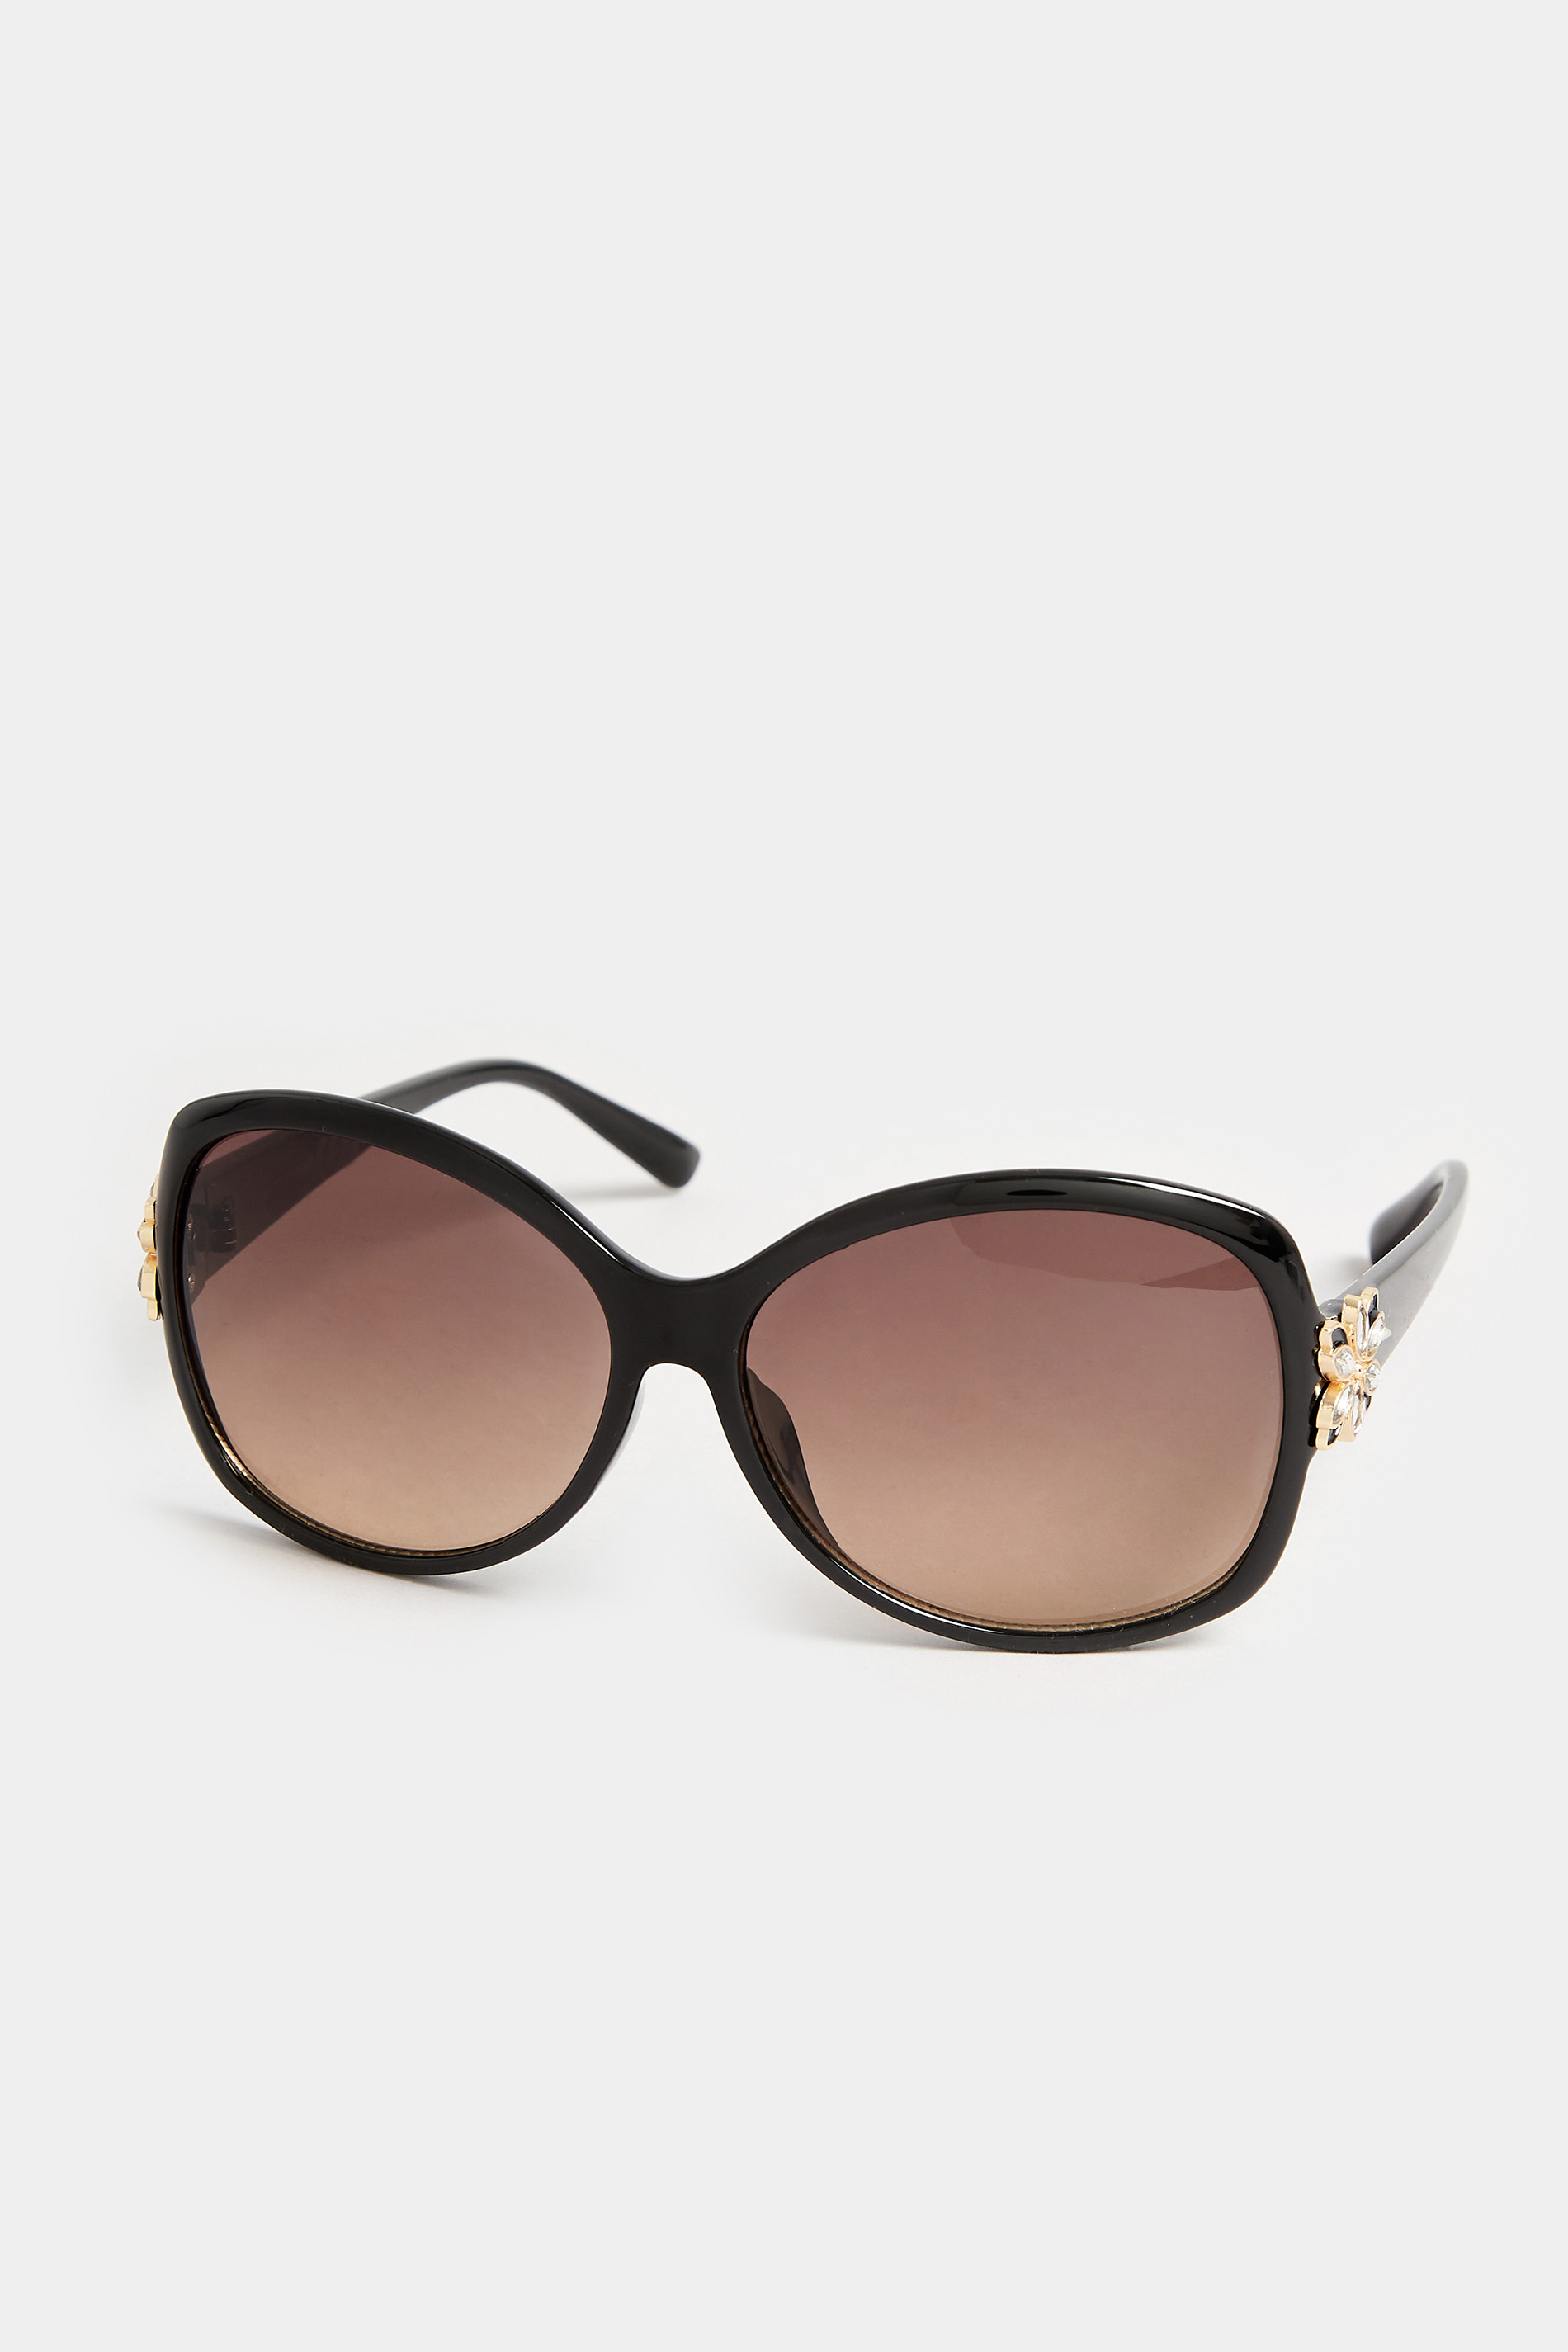 Black Oversized Floral Detail Sunglasses | Yours Clothing 2